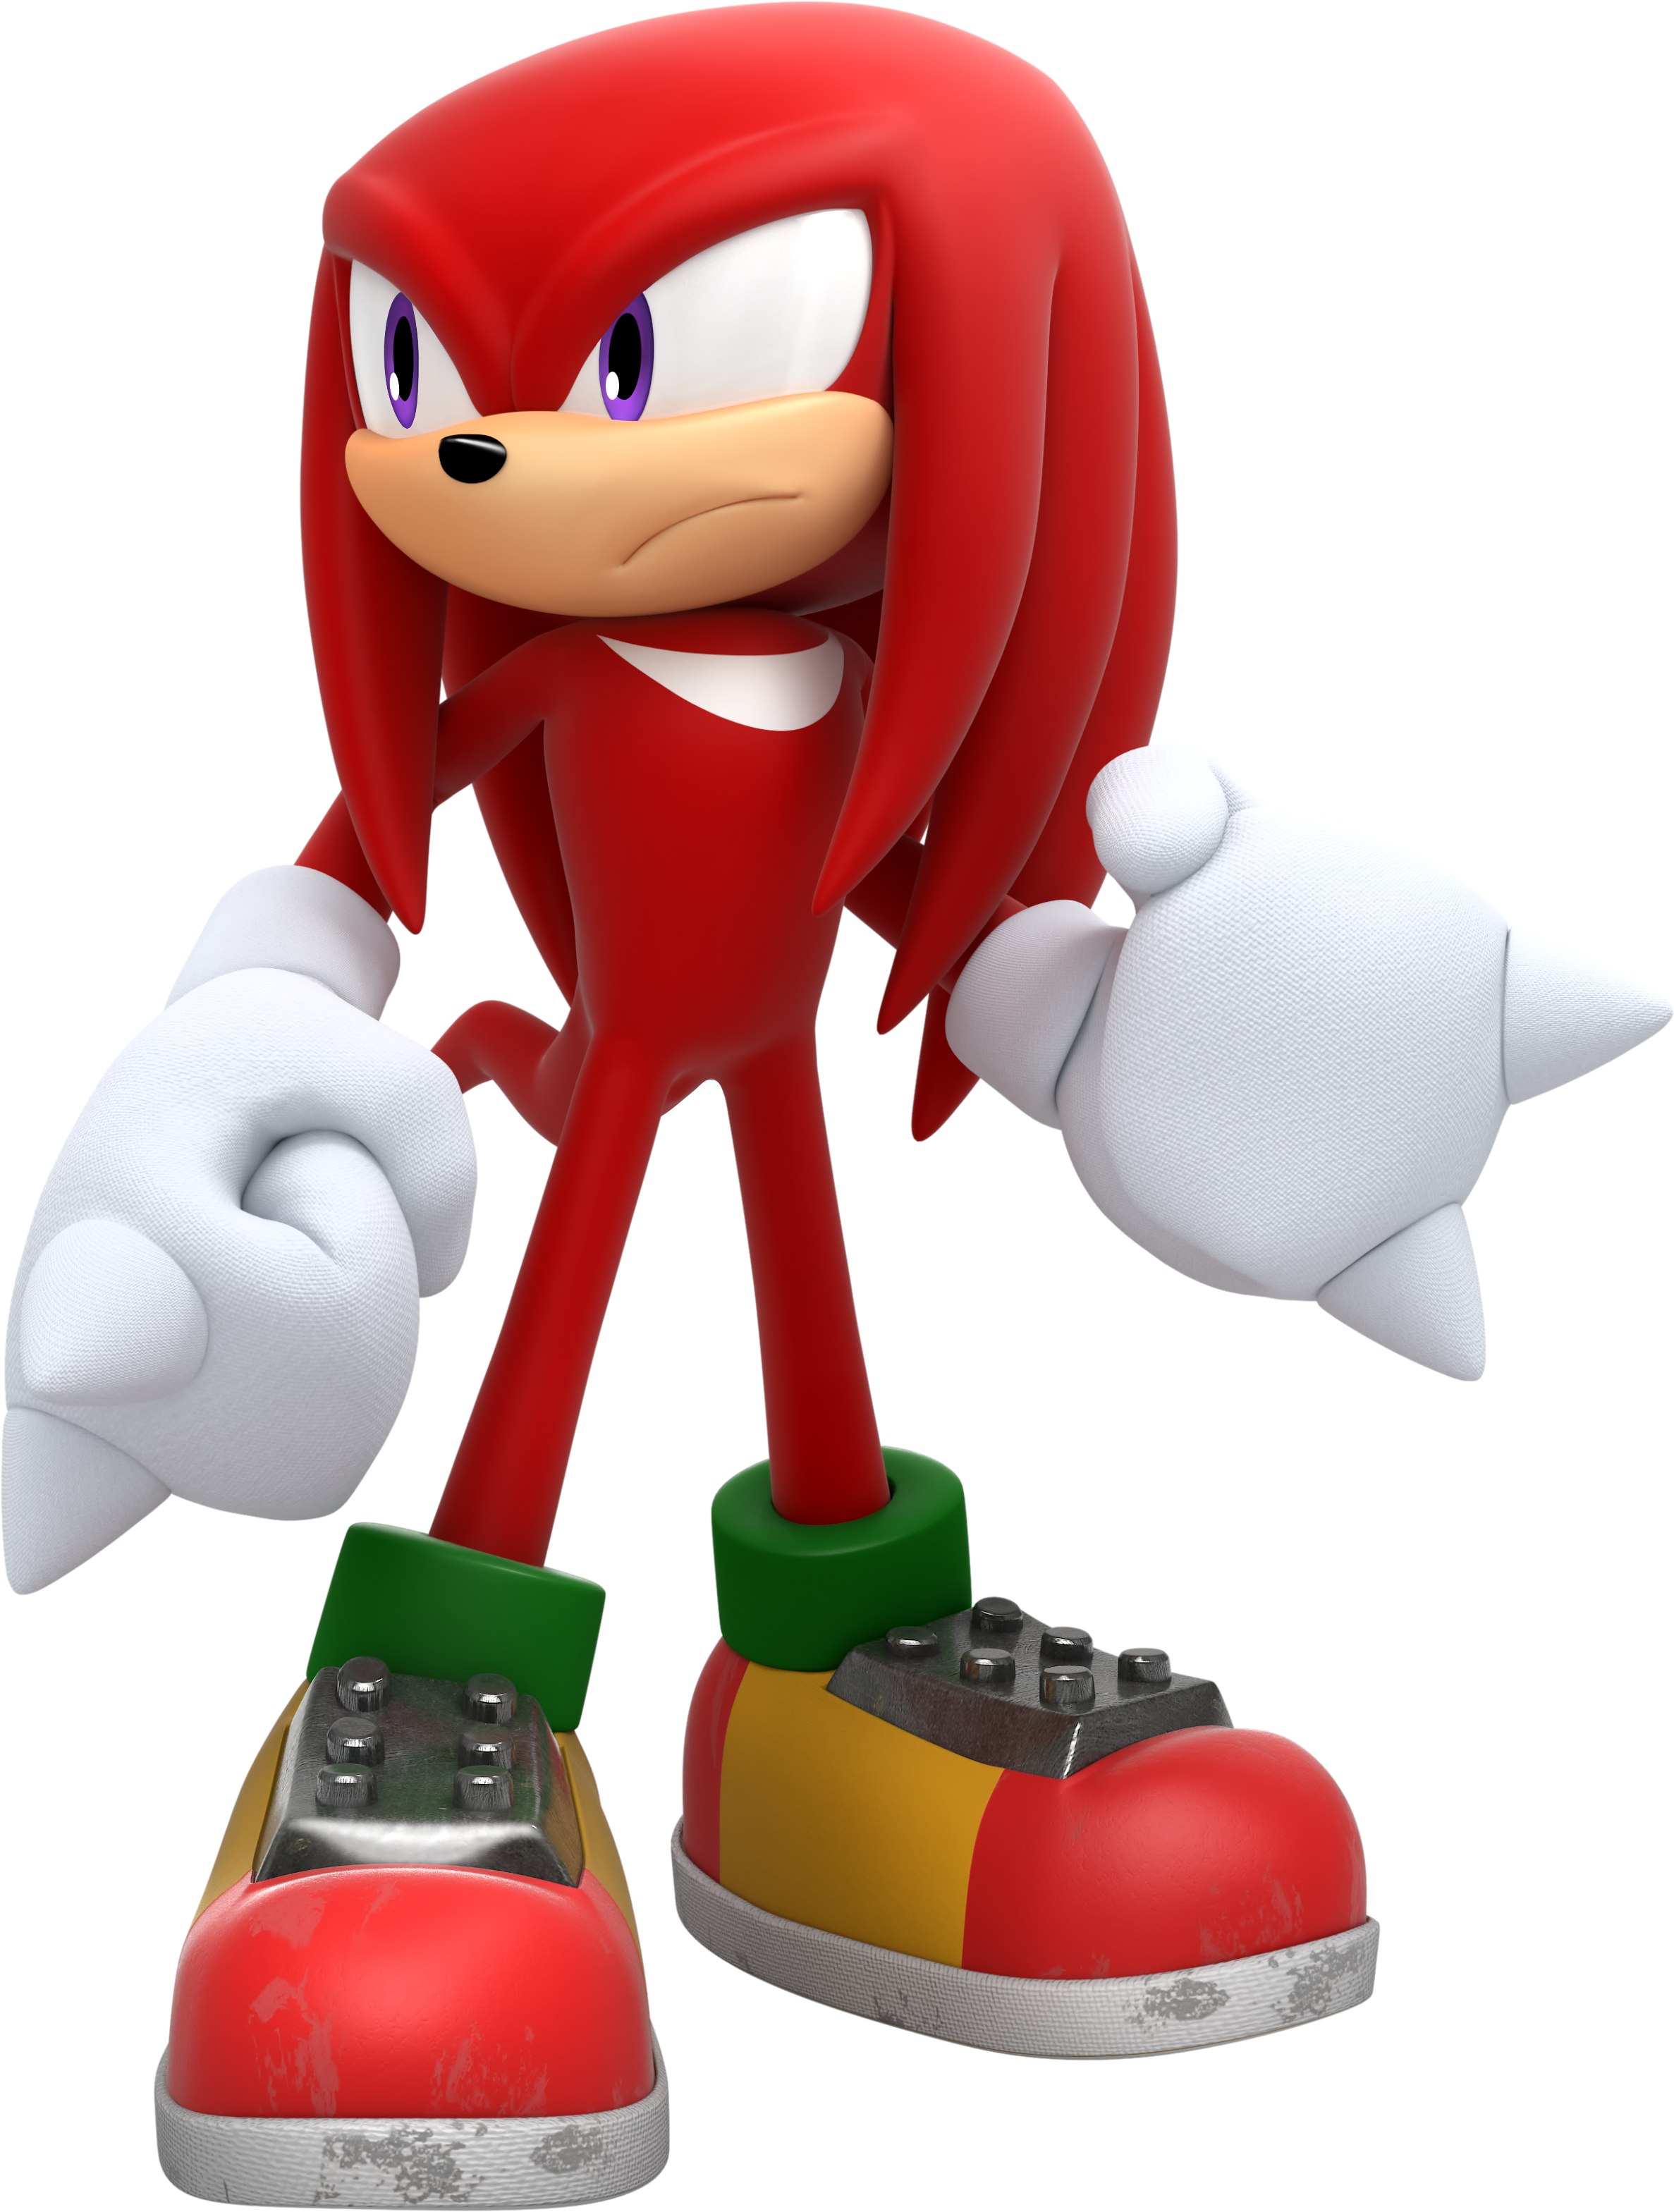 Knuckles the Echidna | Heroes Wiki | FANDOM powered by Wikia